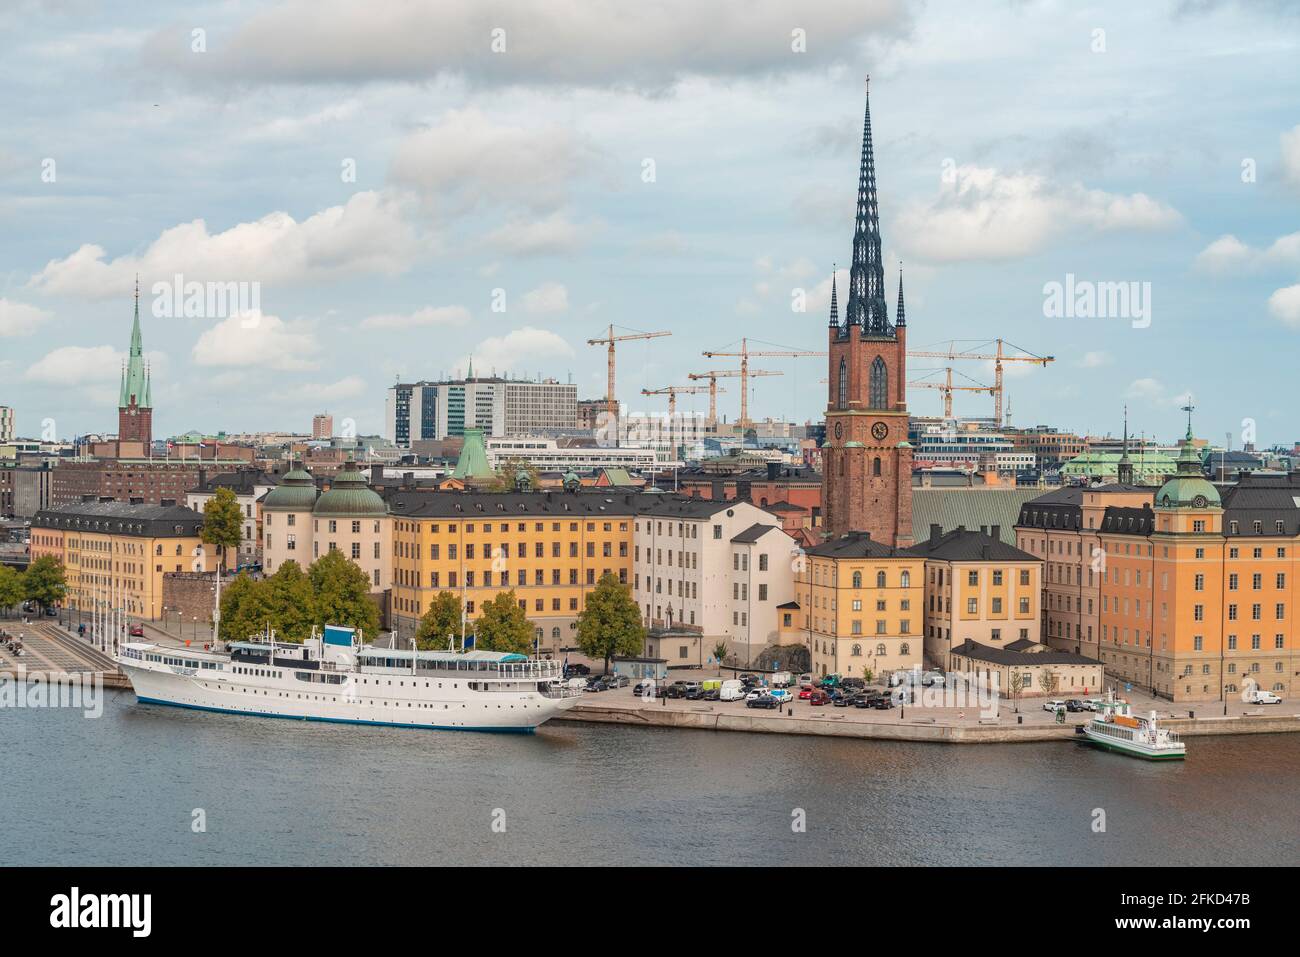 Sweden, Sodermanland, Stockholm, Cityscape with church tower Stock Photo